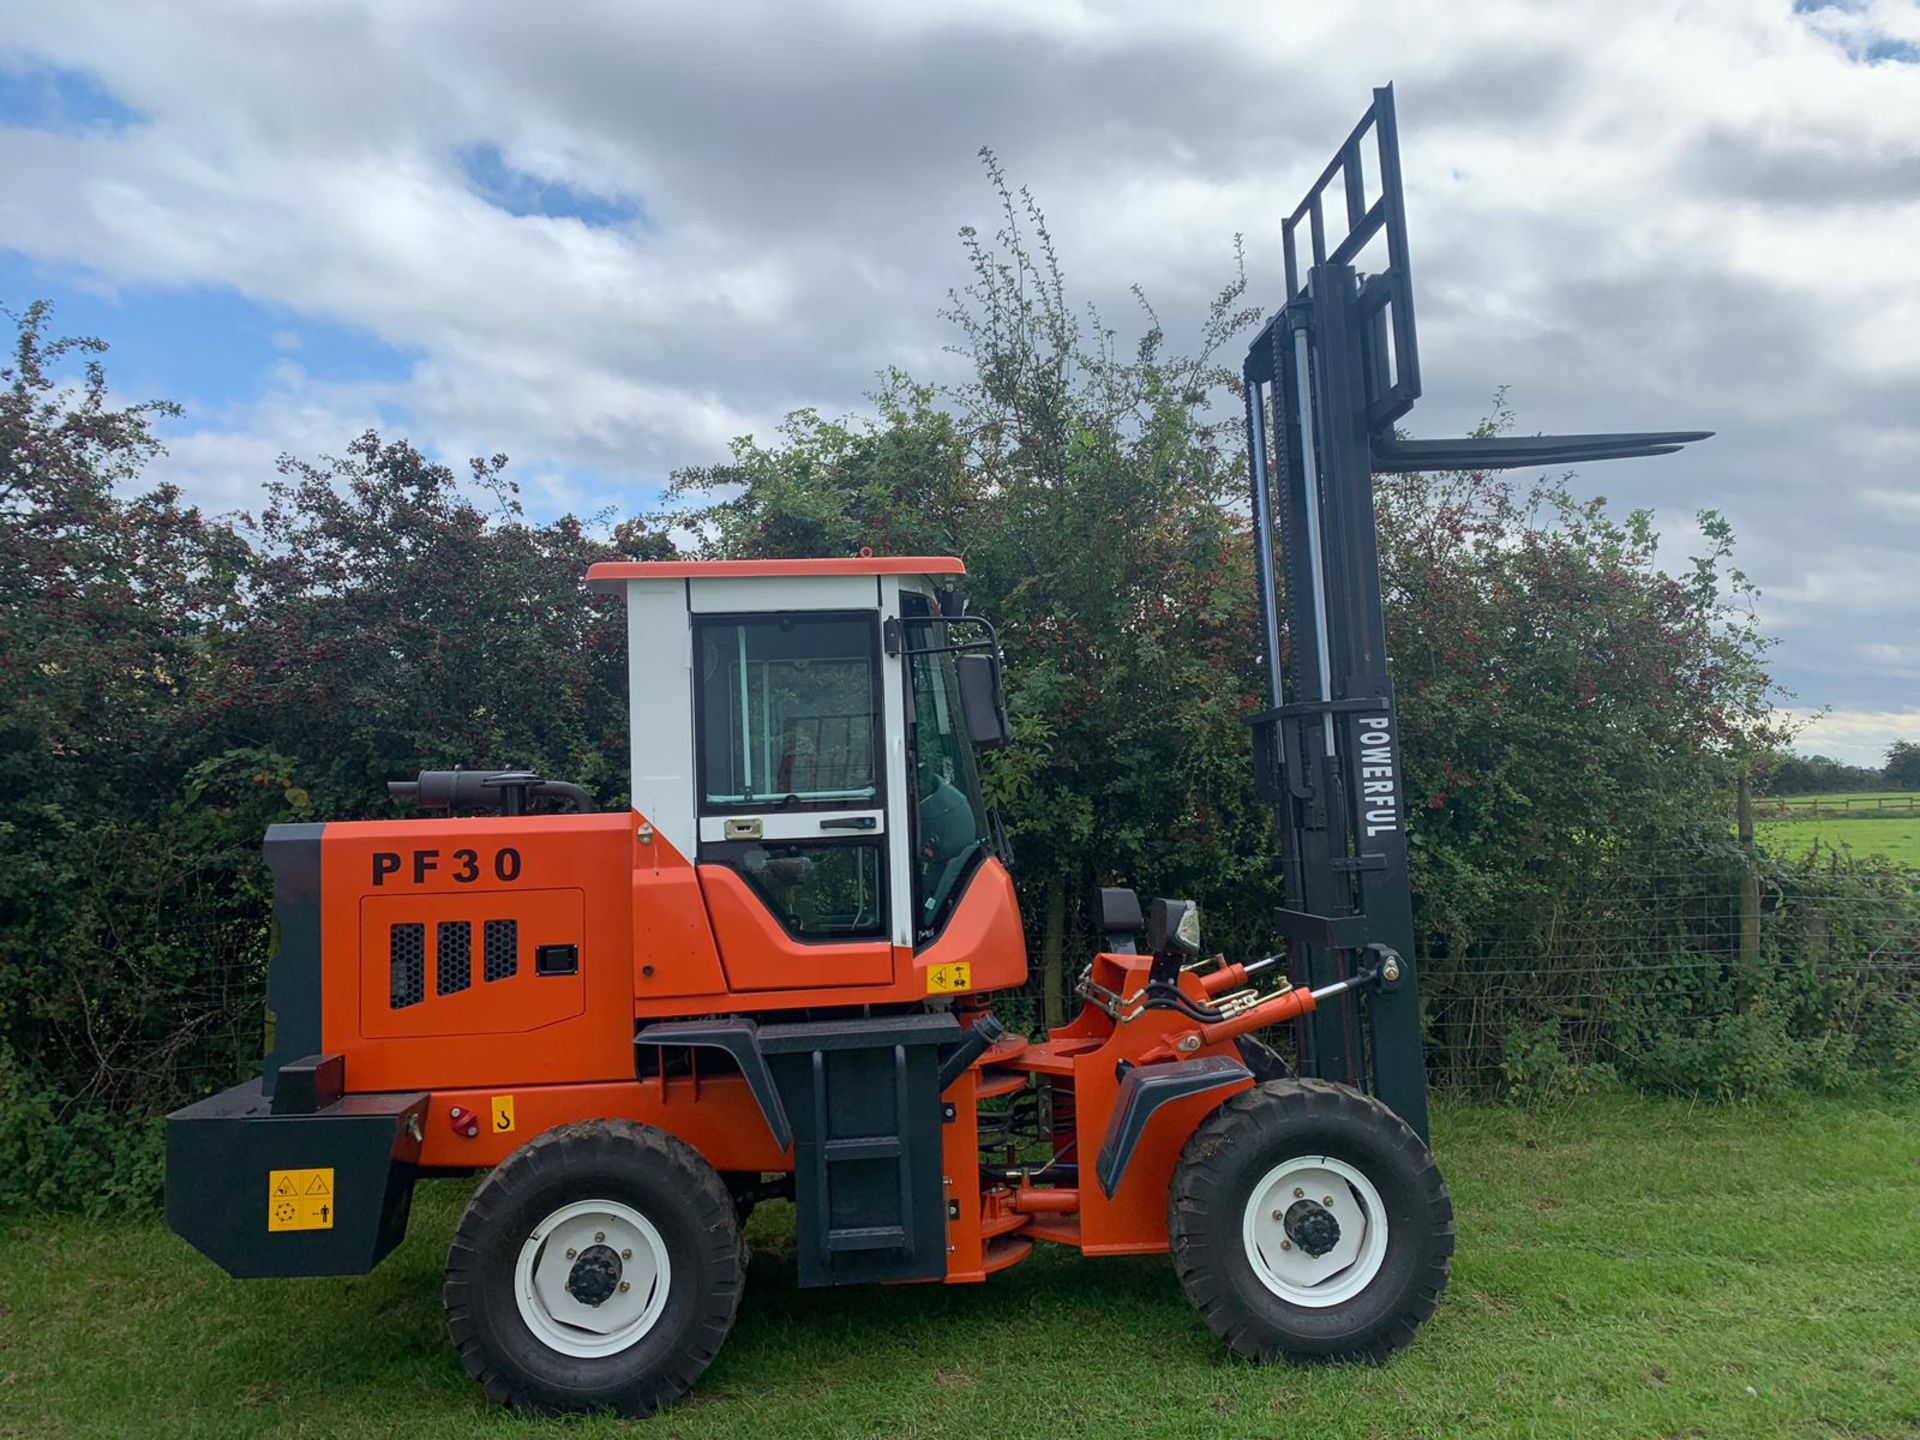 BRAND NEW 2019 ATTACK PF30 4X4 ROUGH TERRAIN POWERFUL FORKLIFT C/W 2 STAGE MAST *PLUS VAT* - Image 2 of 12